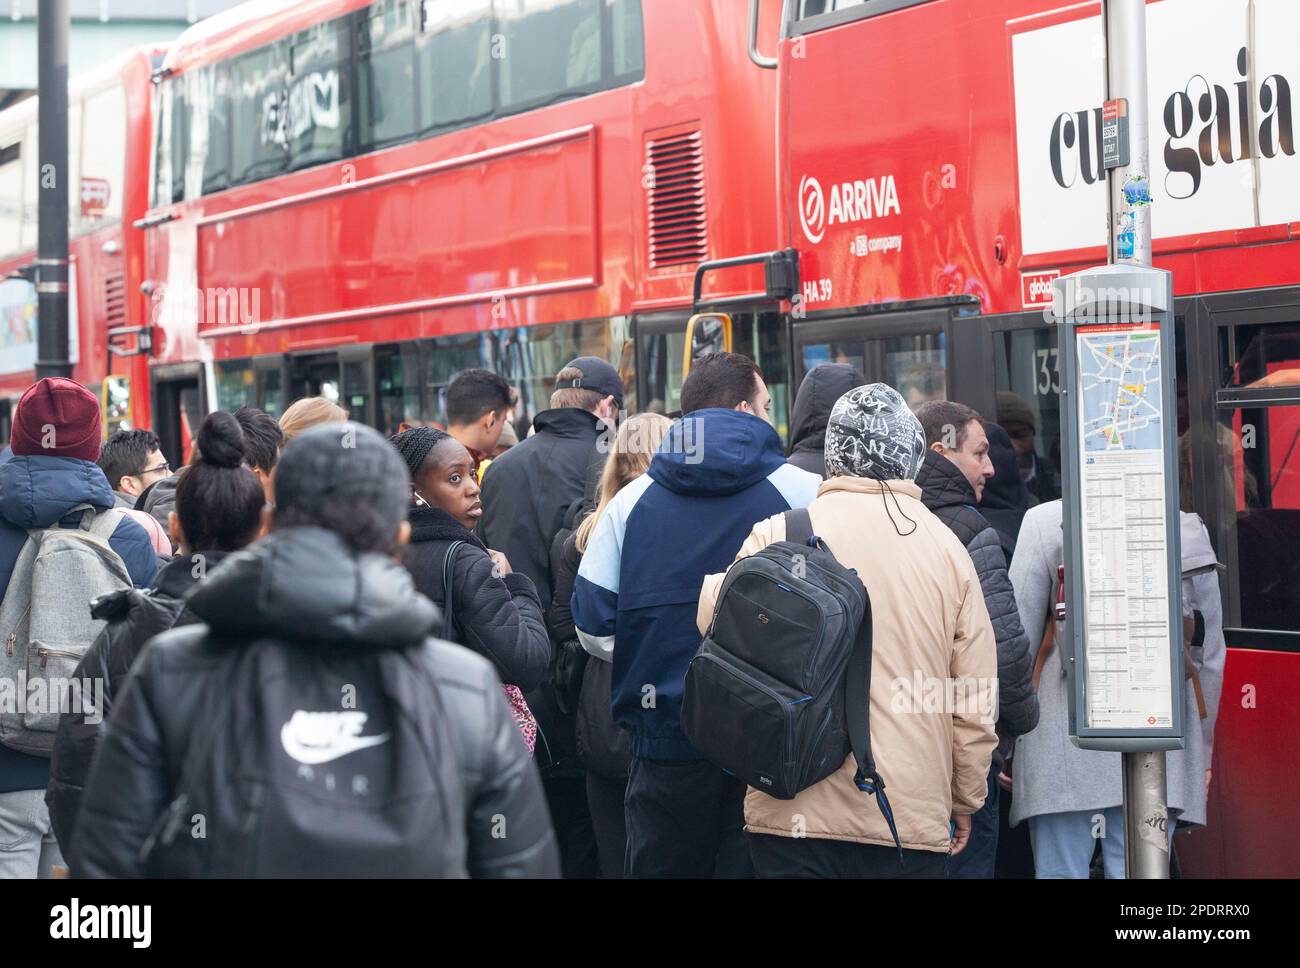 London, UK, 15 March 2023: The RMT and Aslef unions are on strike, completely closing the London Underground today, with a picket line at Brixton station. Commuters squeezed on to buses but sometimes they arrived too full to take on any more passengers. Anna Watson/Alamy Live News Stock Photo